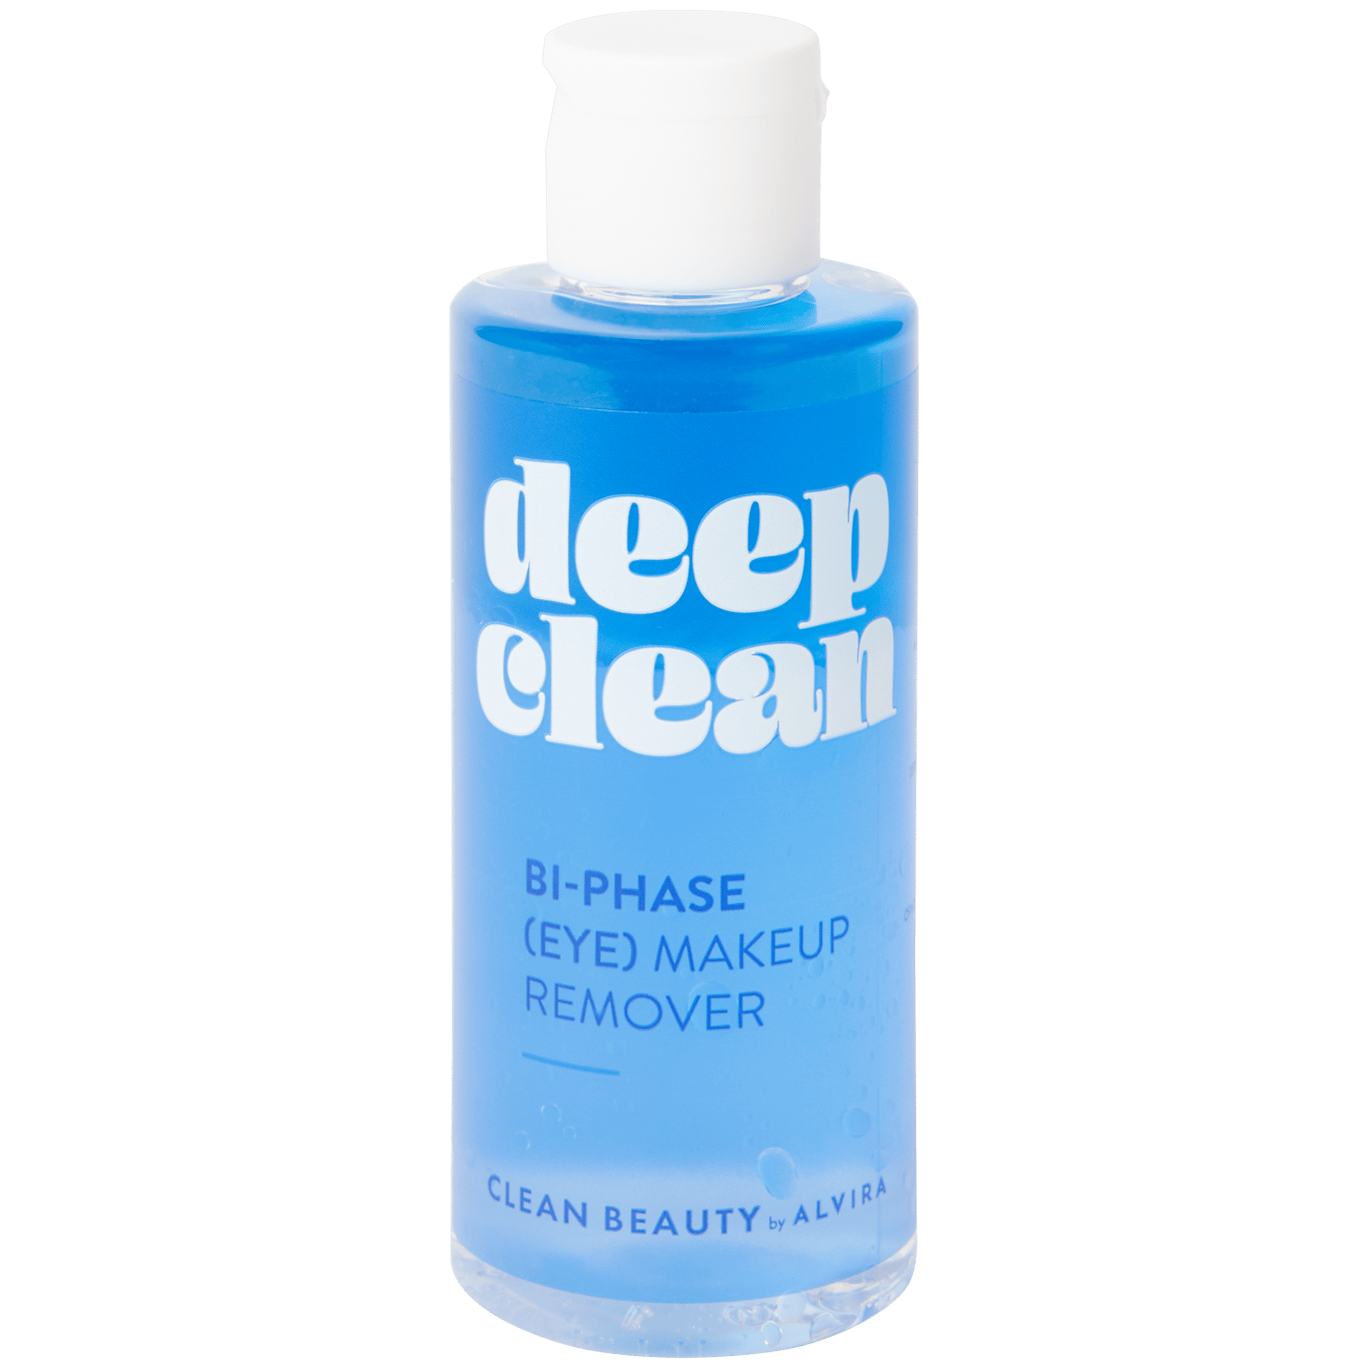 Alvira Clean Beauty make-up remover